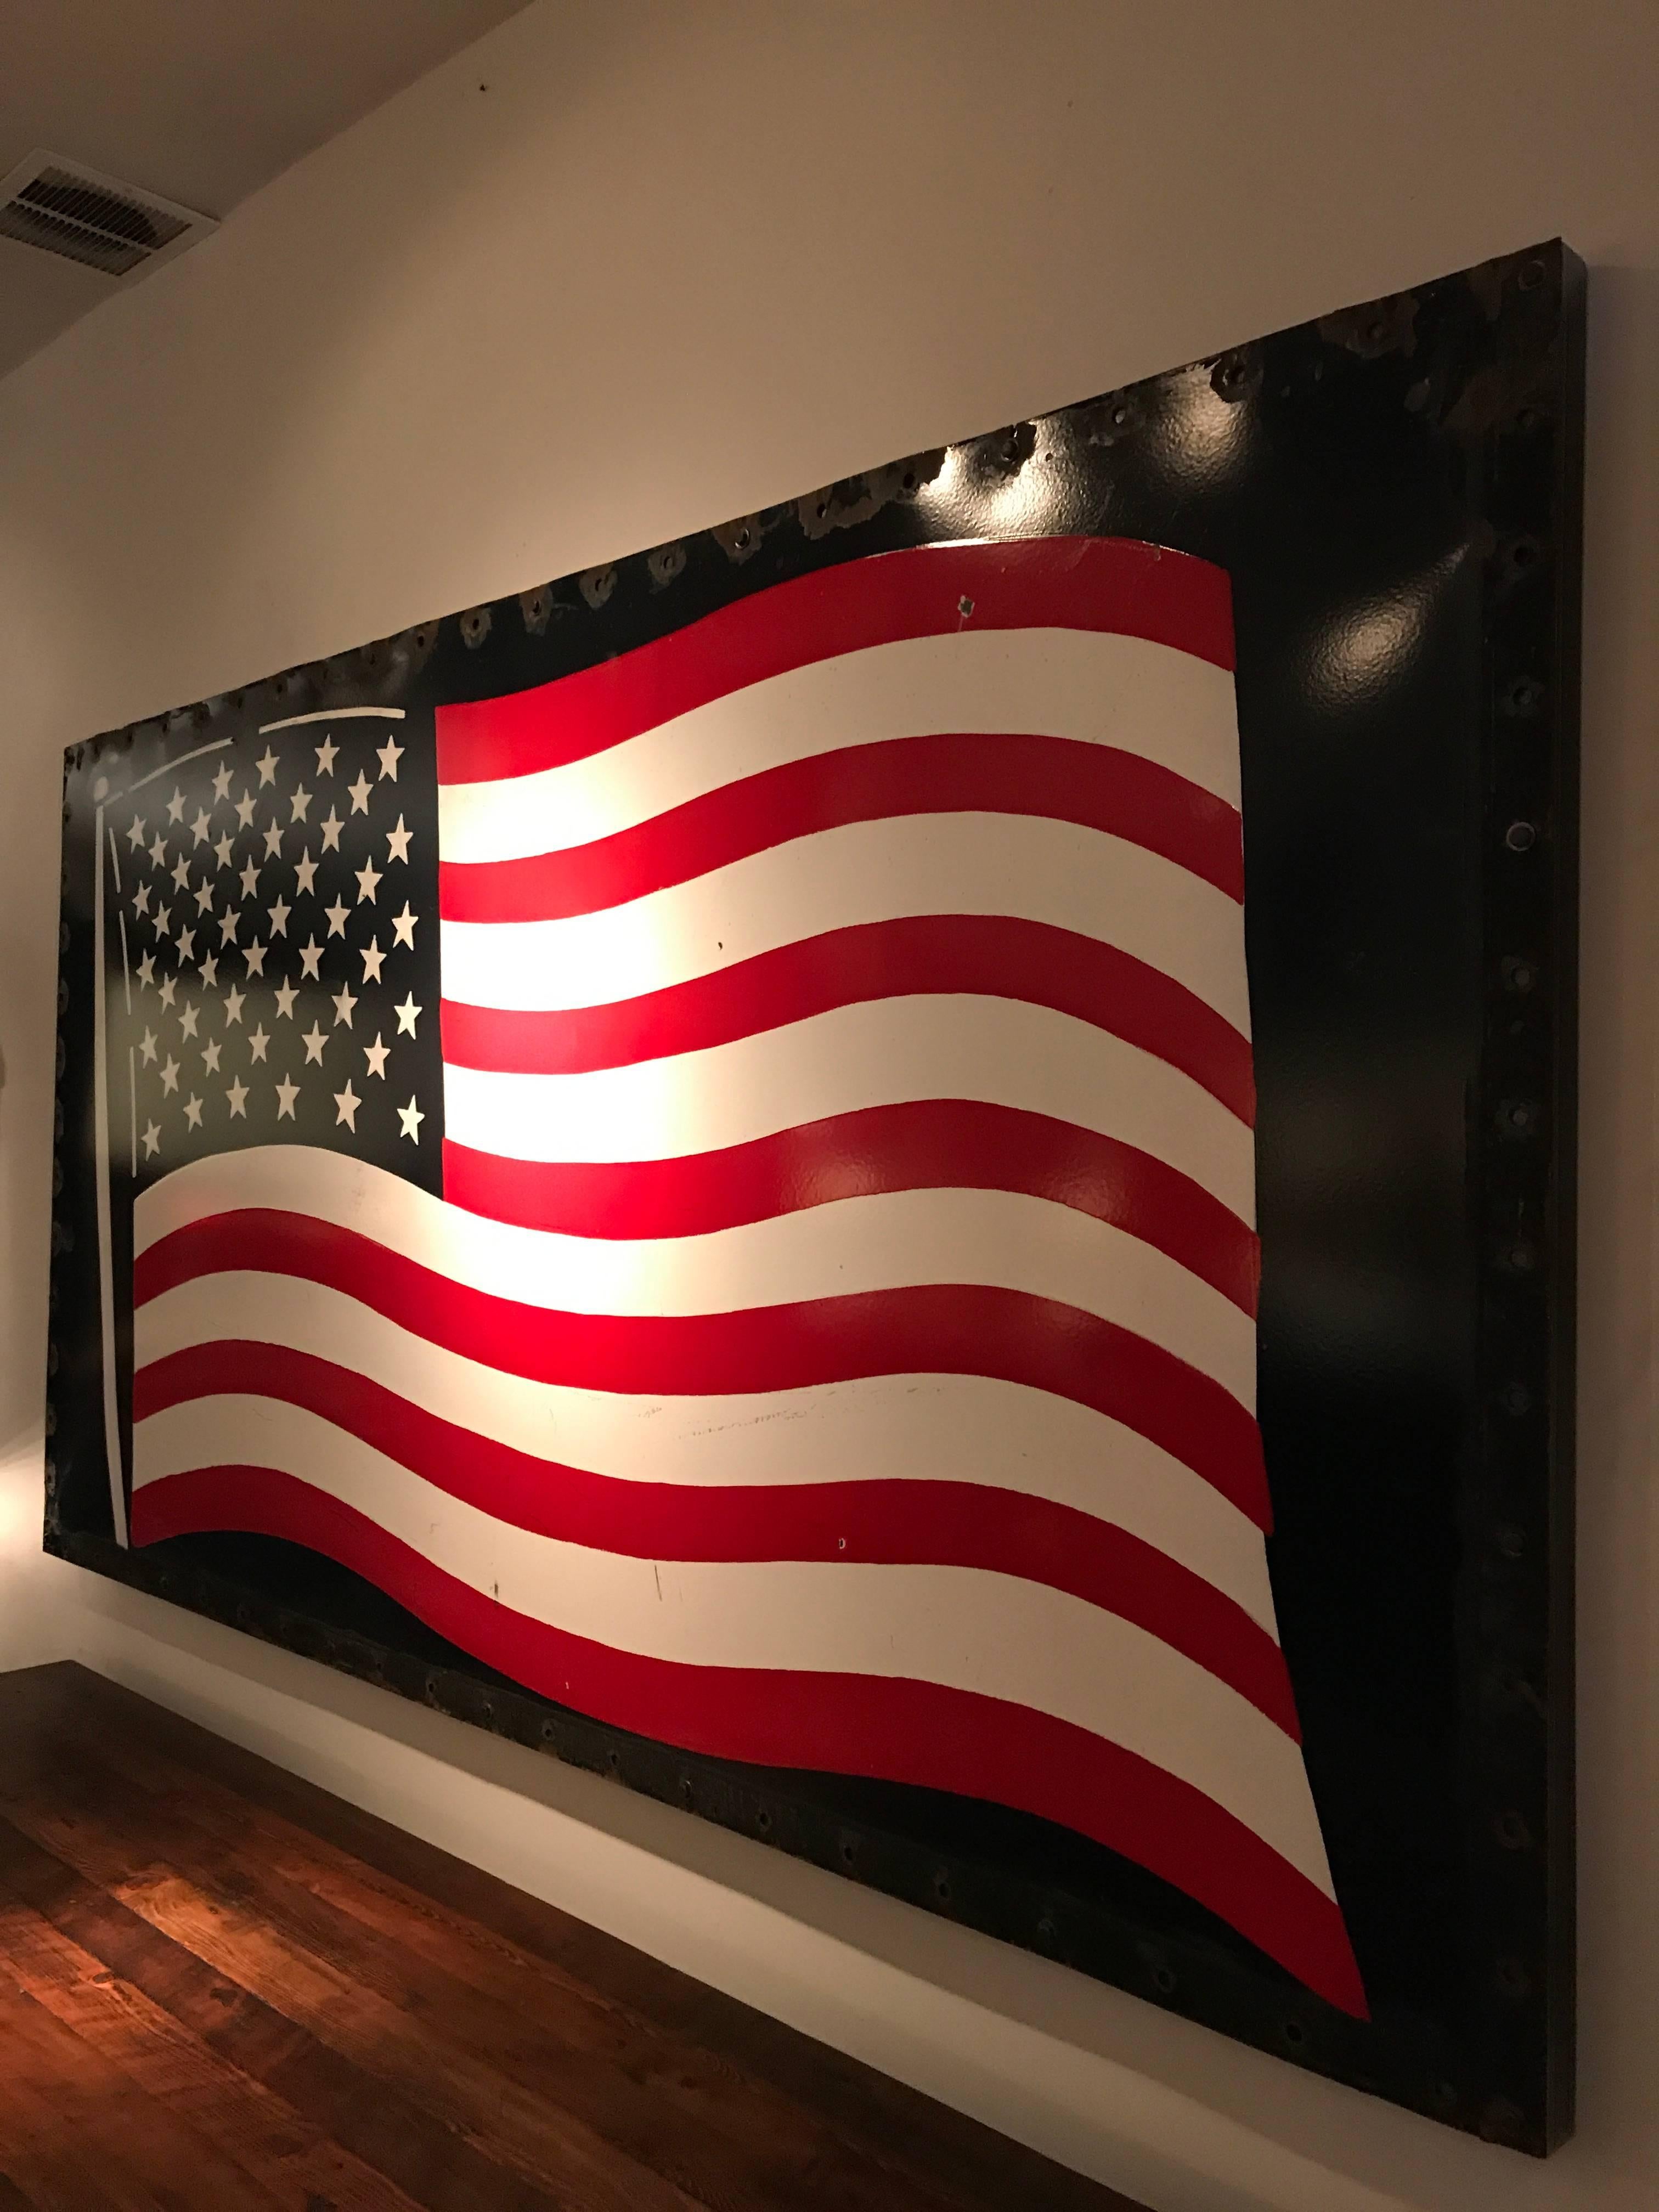 Large-scale enamel on steel American flag mounted onto a steel frame with a built in French cleat.